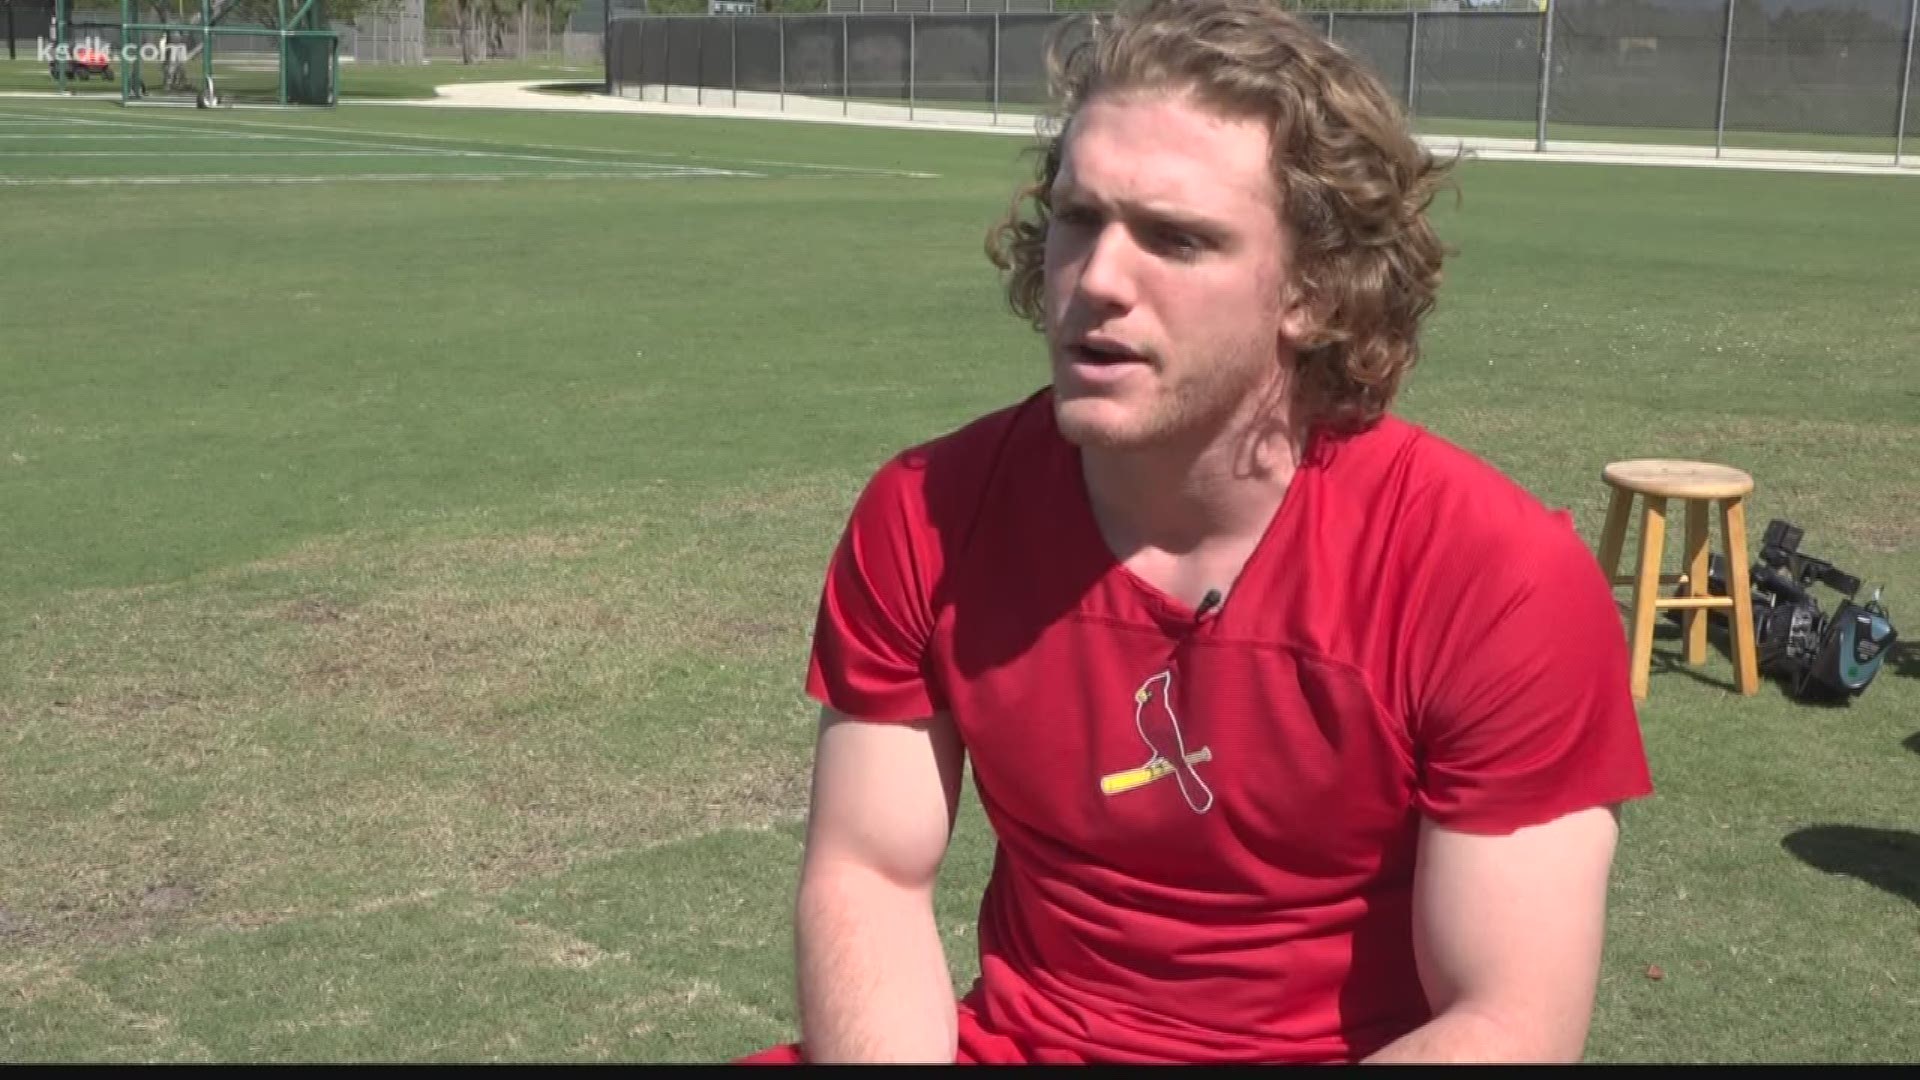 Harrison Bader is ready for his encore in 2019